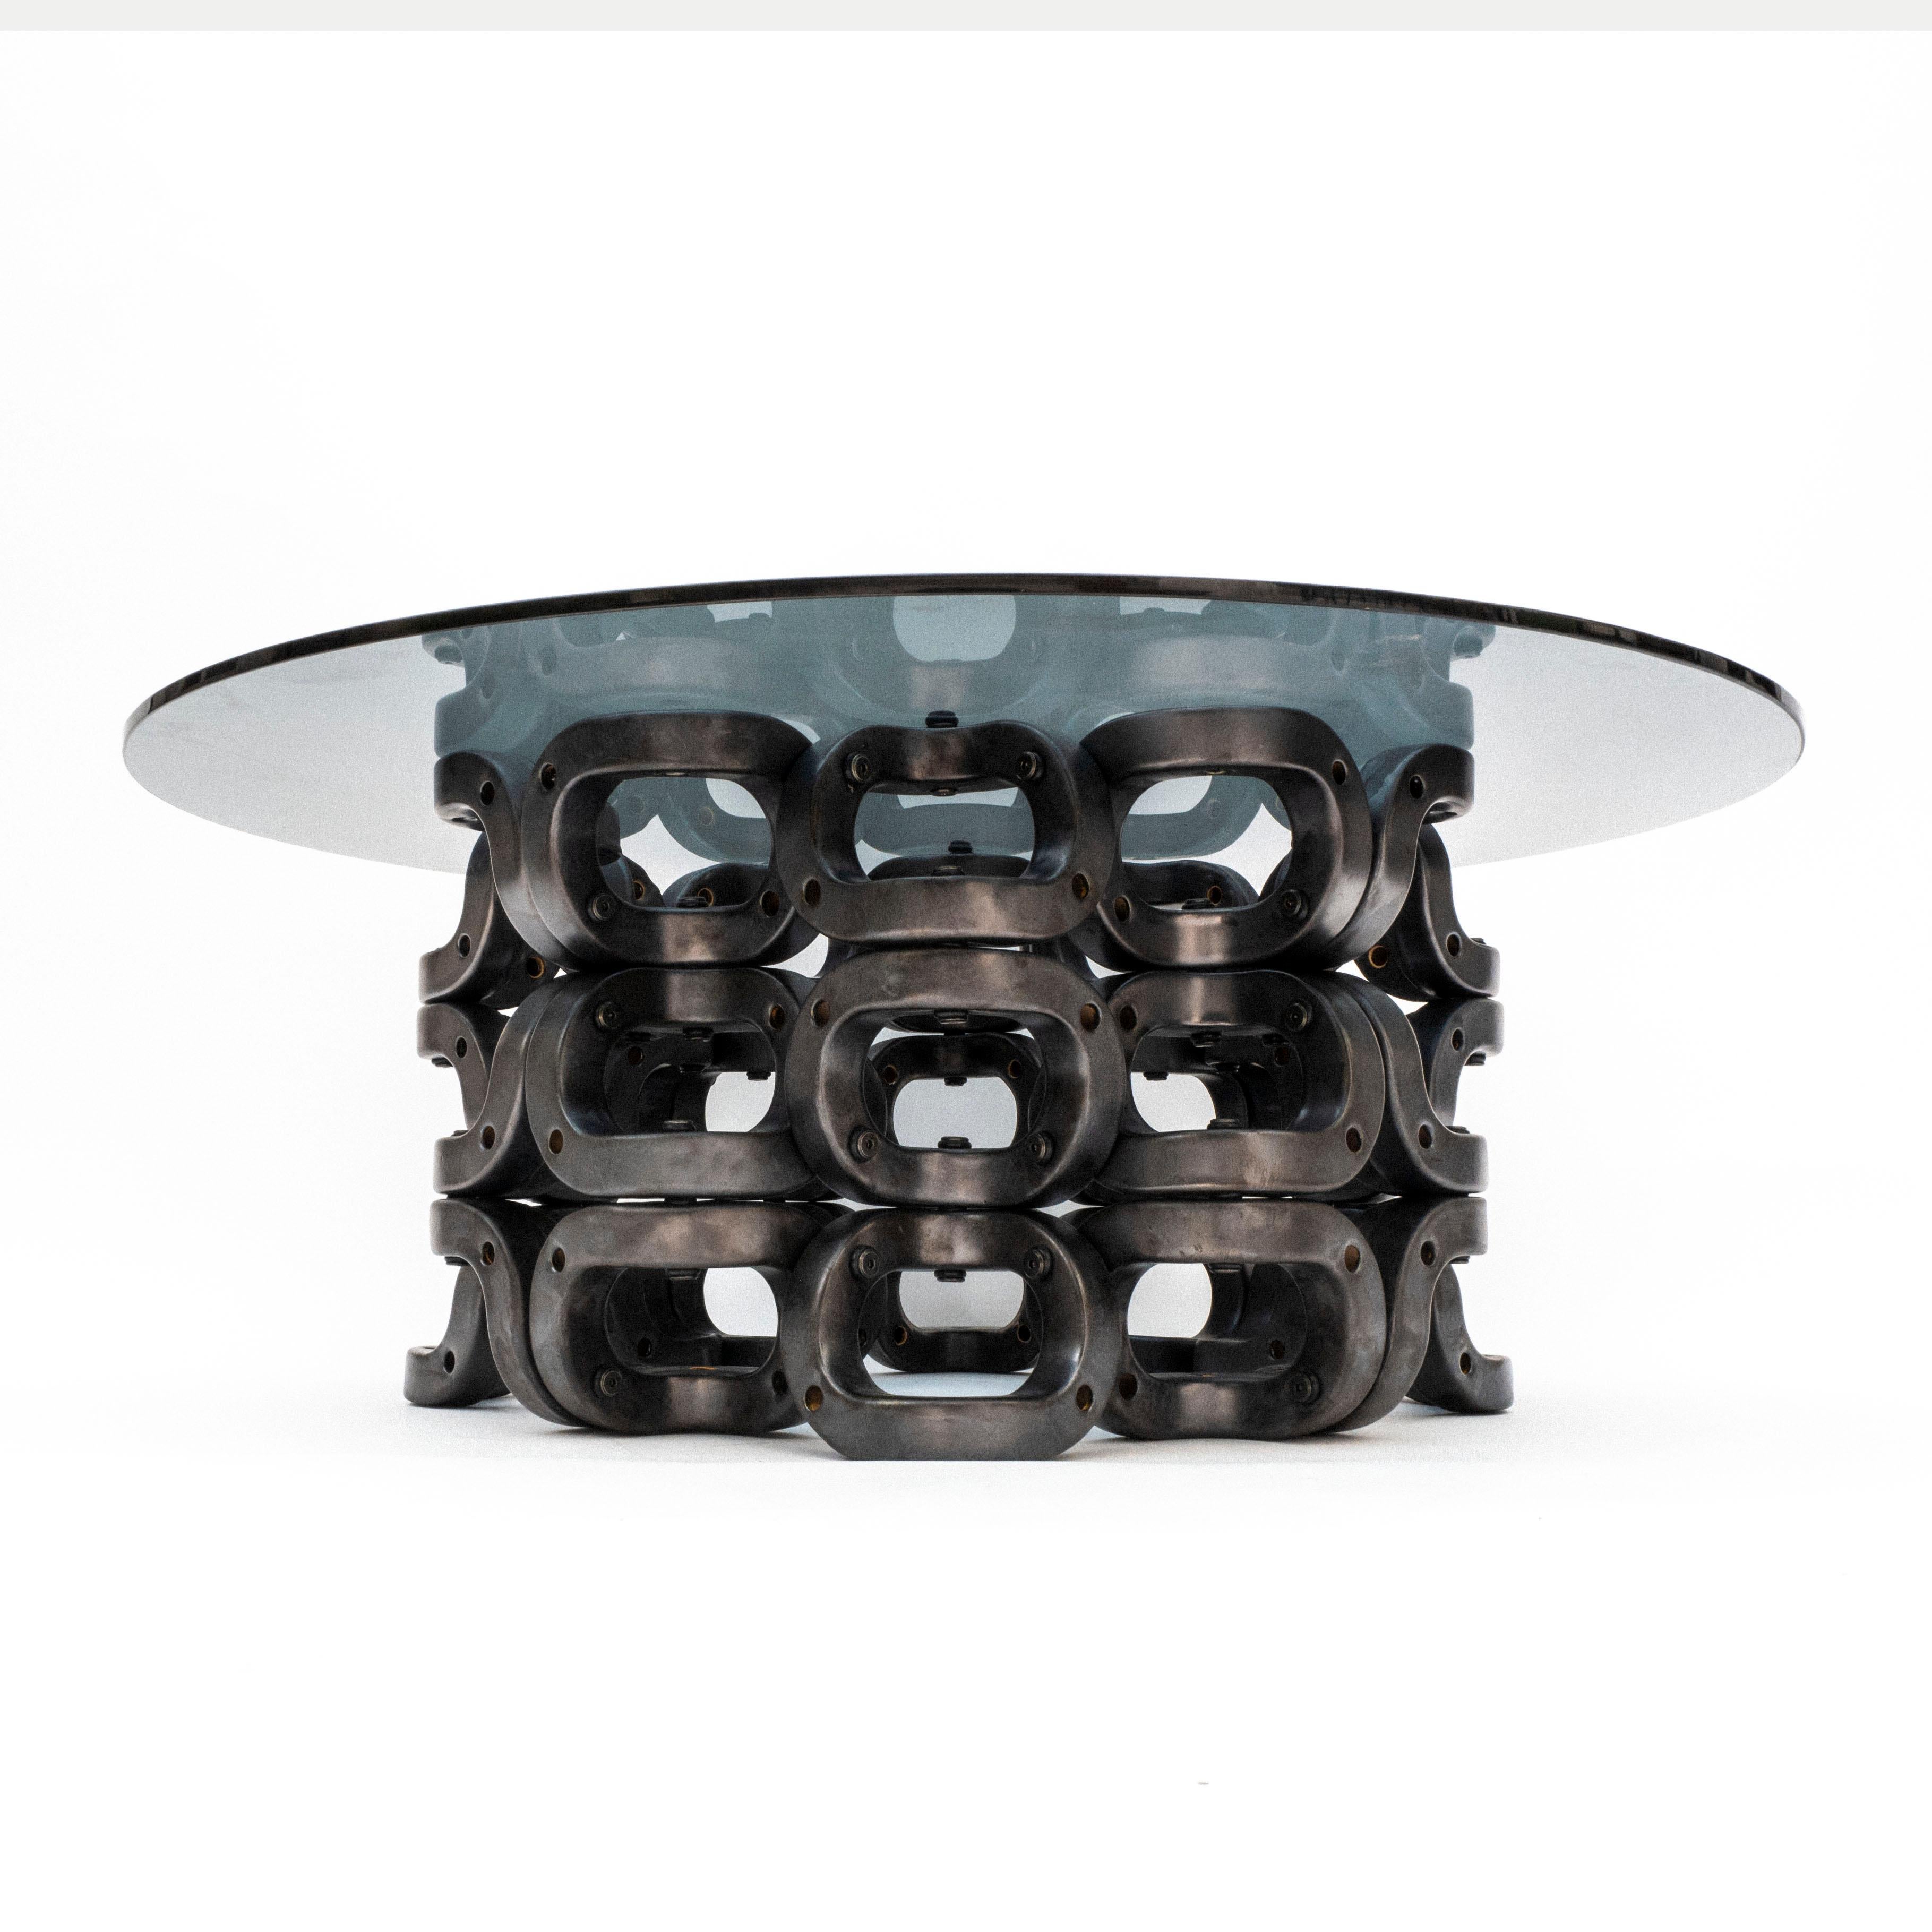 Laila; Modular Geometric Contemporary Ceramic and Glass Table by Pedro Cerisola For Sale 4